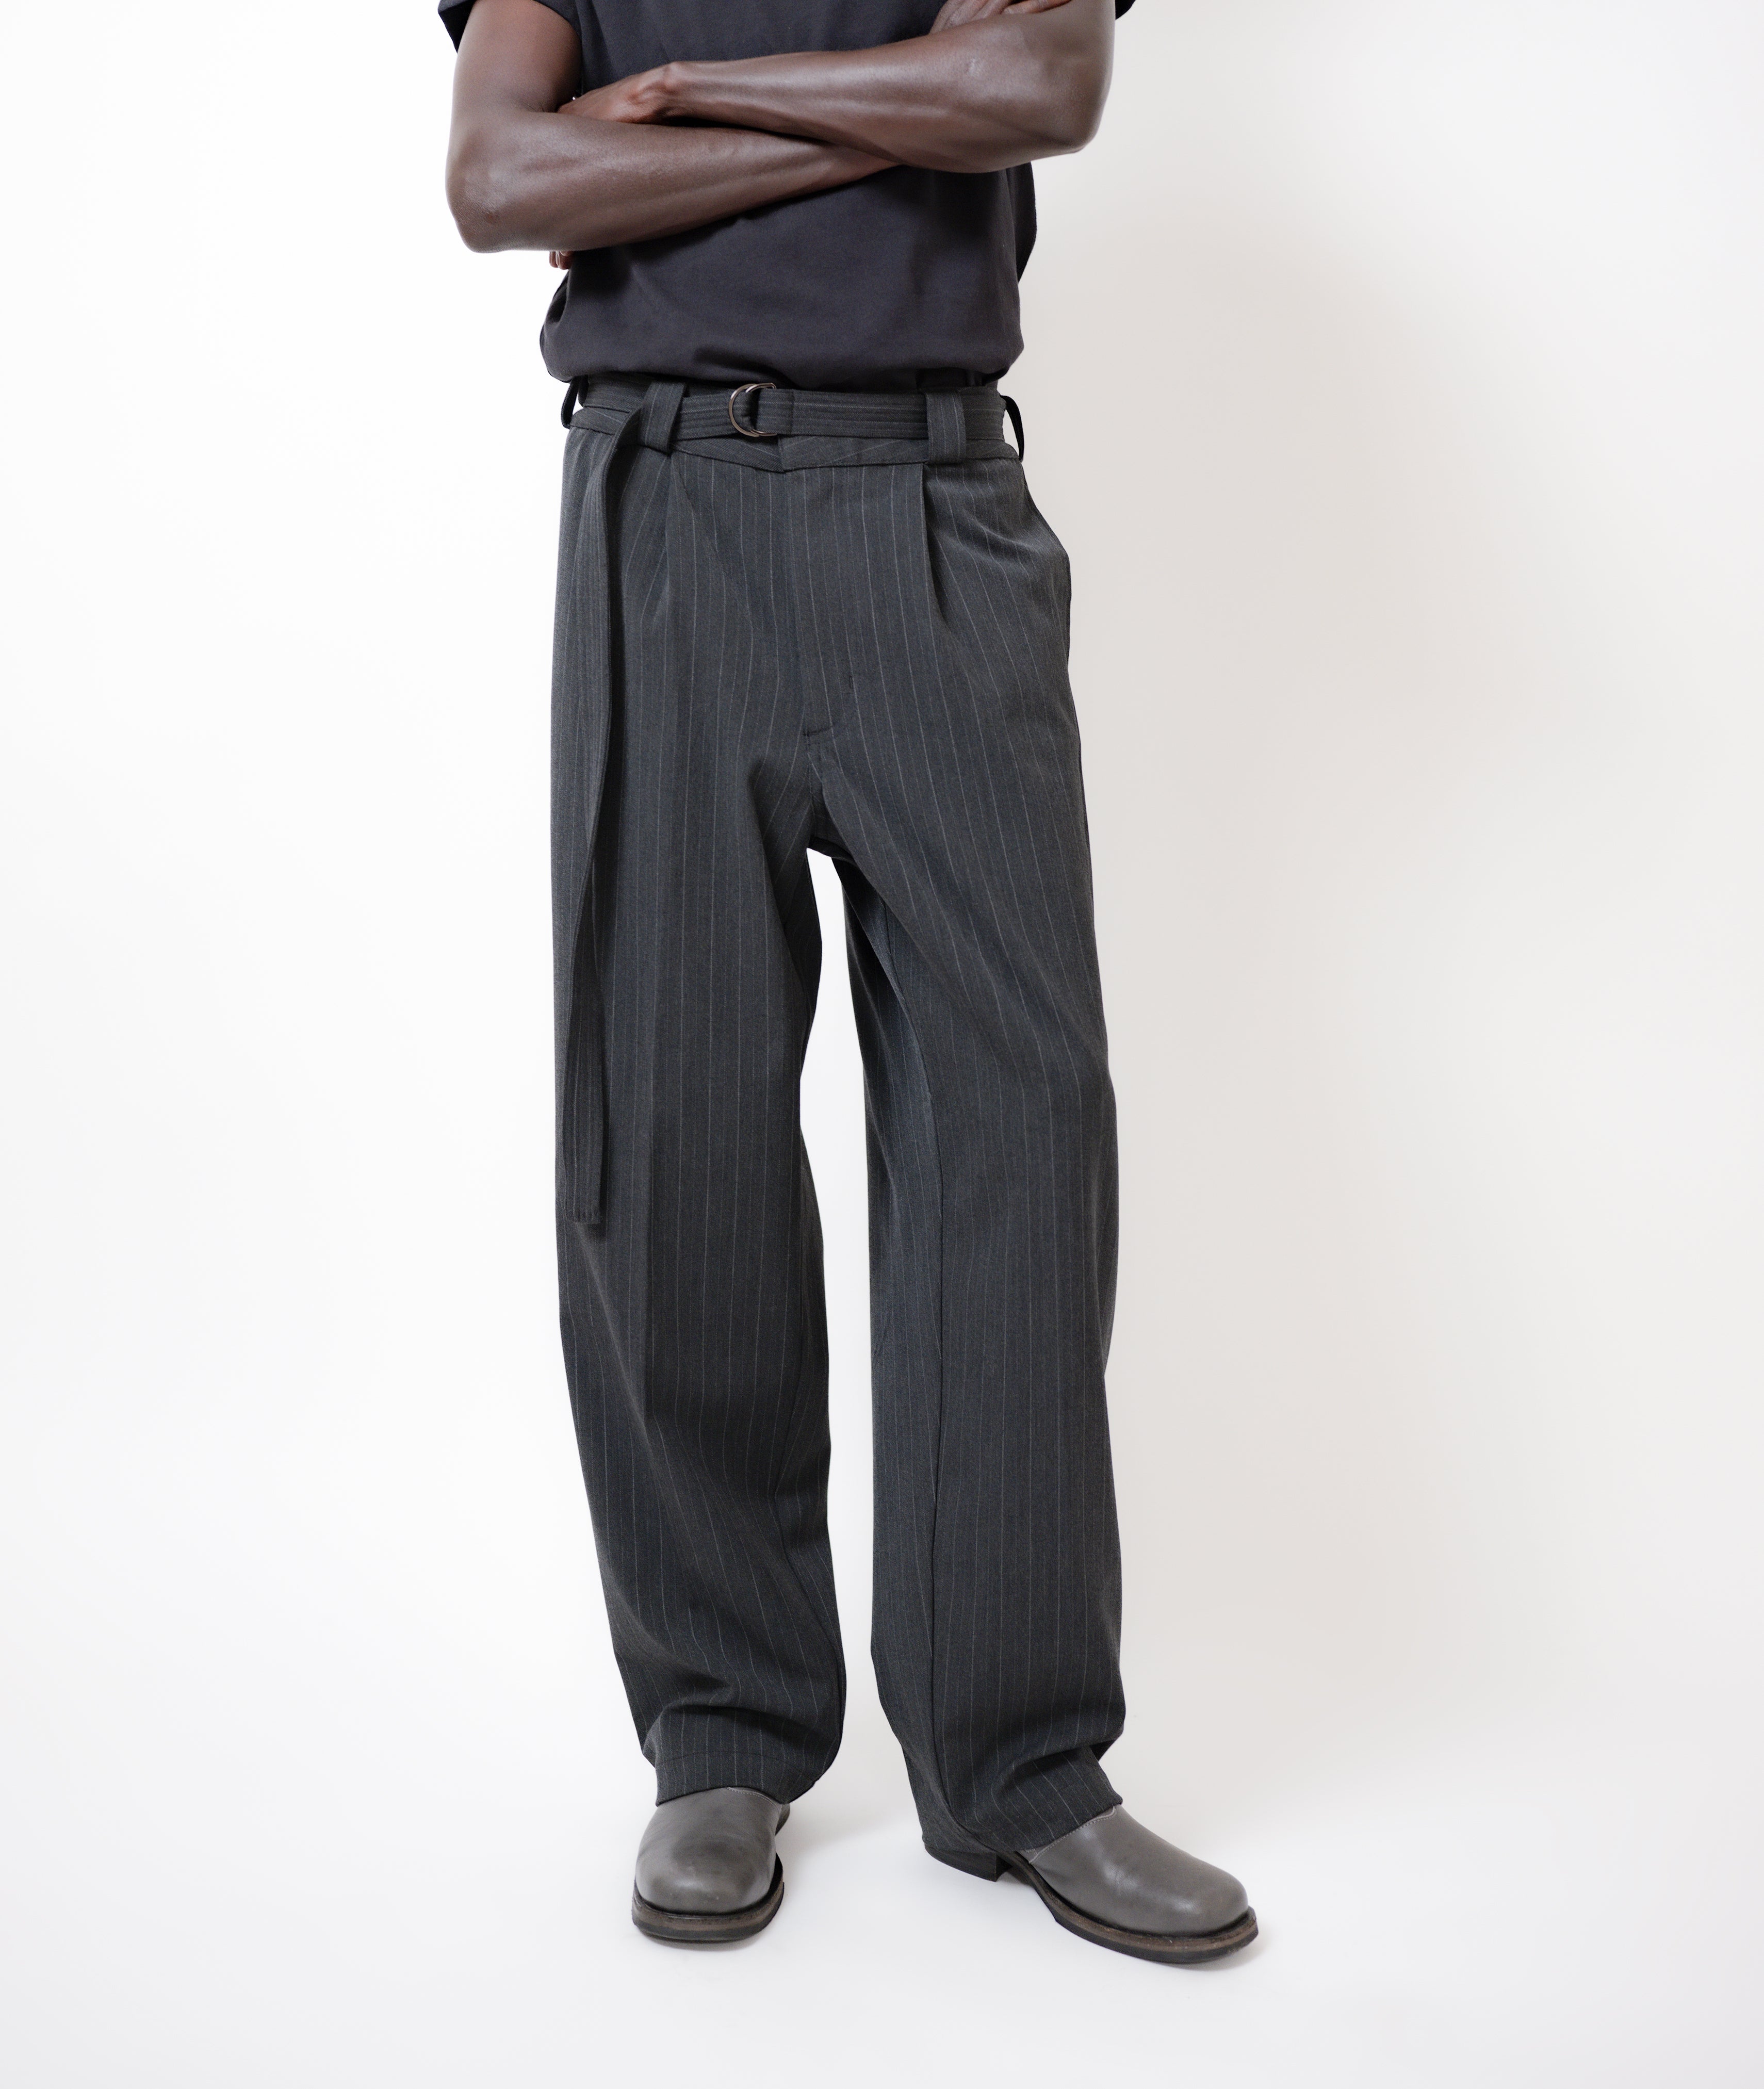 Beach Brains | Pleated Suit Pant - Charcoal Pinstripe